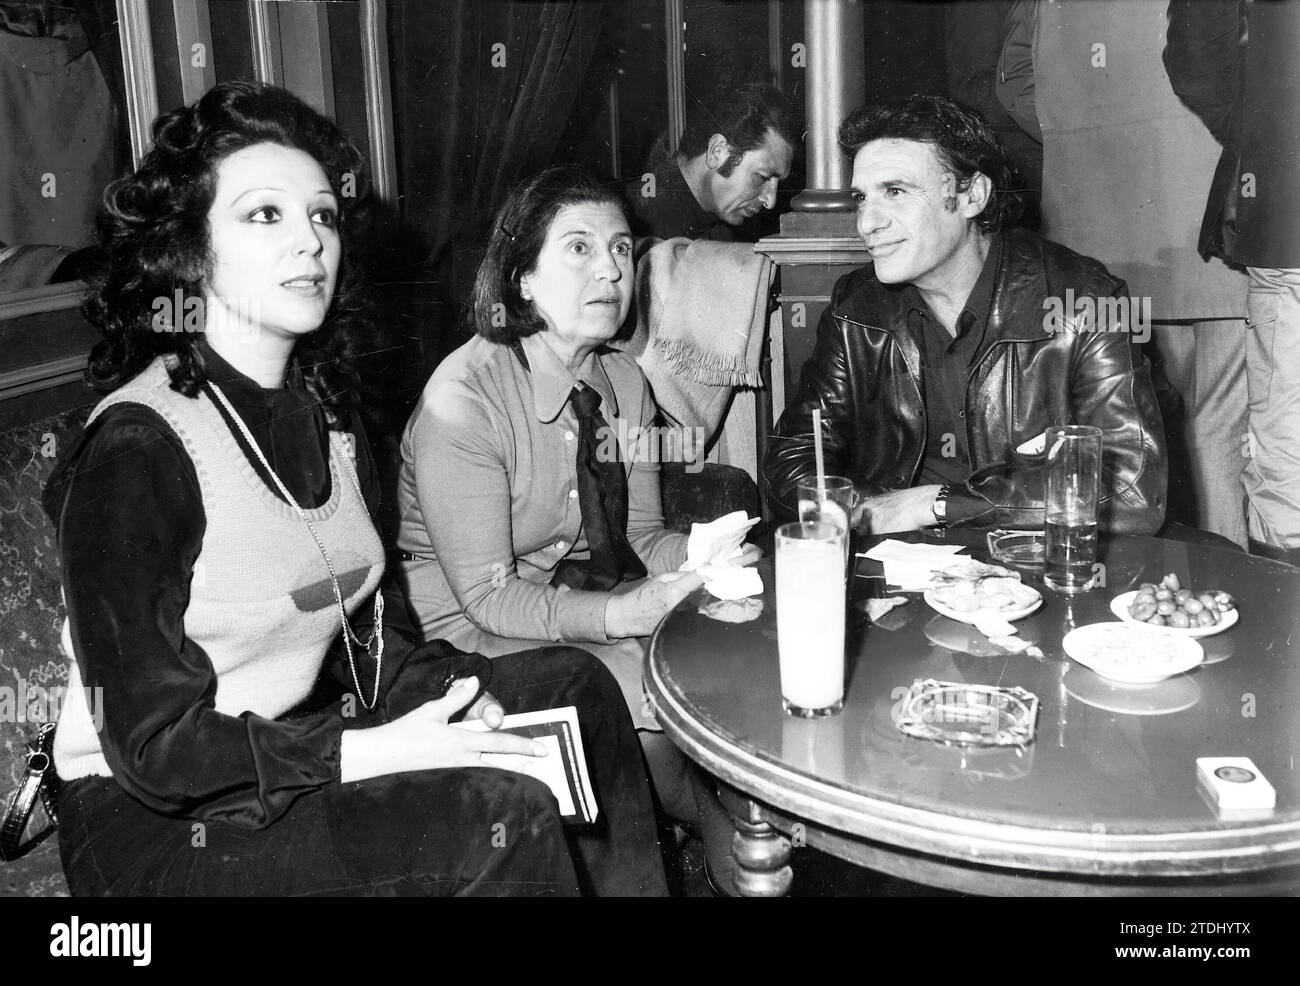 02/01/1972. Paco Rabal, Sofía Morales and Esperanza Roy at the presentation of the Book 'Hollywood Stories' by Terenci Moix. Credit: Album / Archivo ABC / Teodoro Naranjo Domínguez Stock Photo